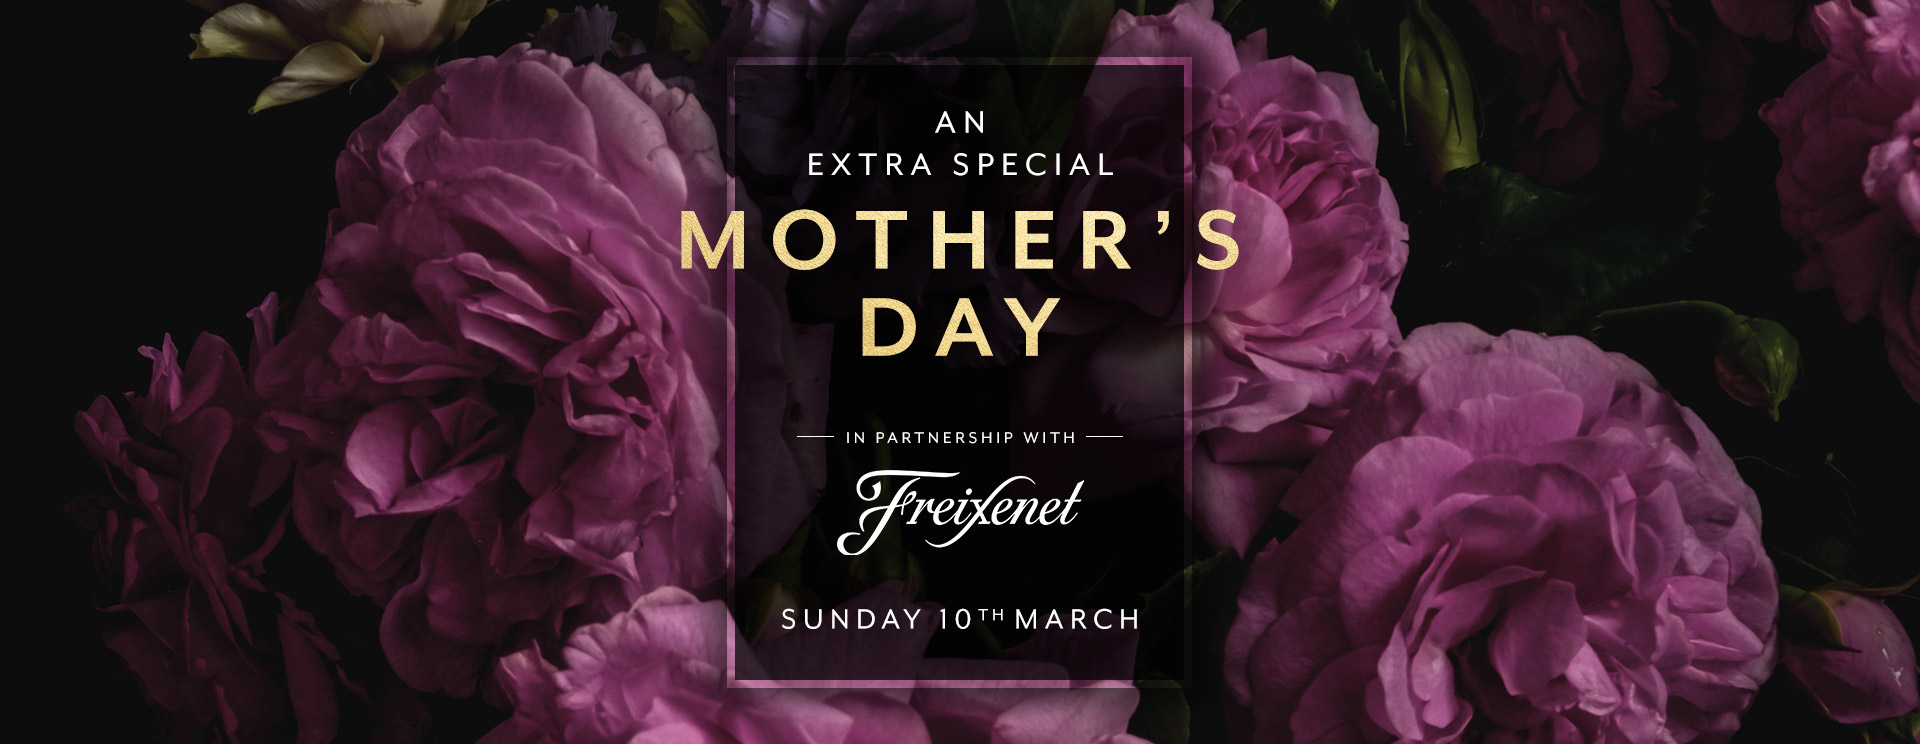 Mother’s Day menu/meal in Maidstone